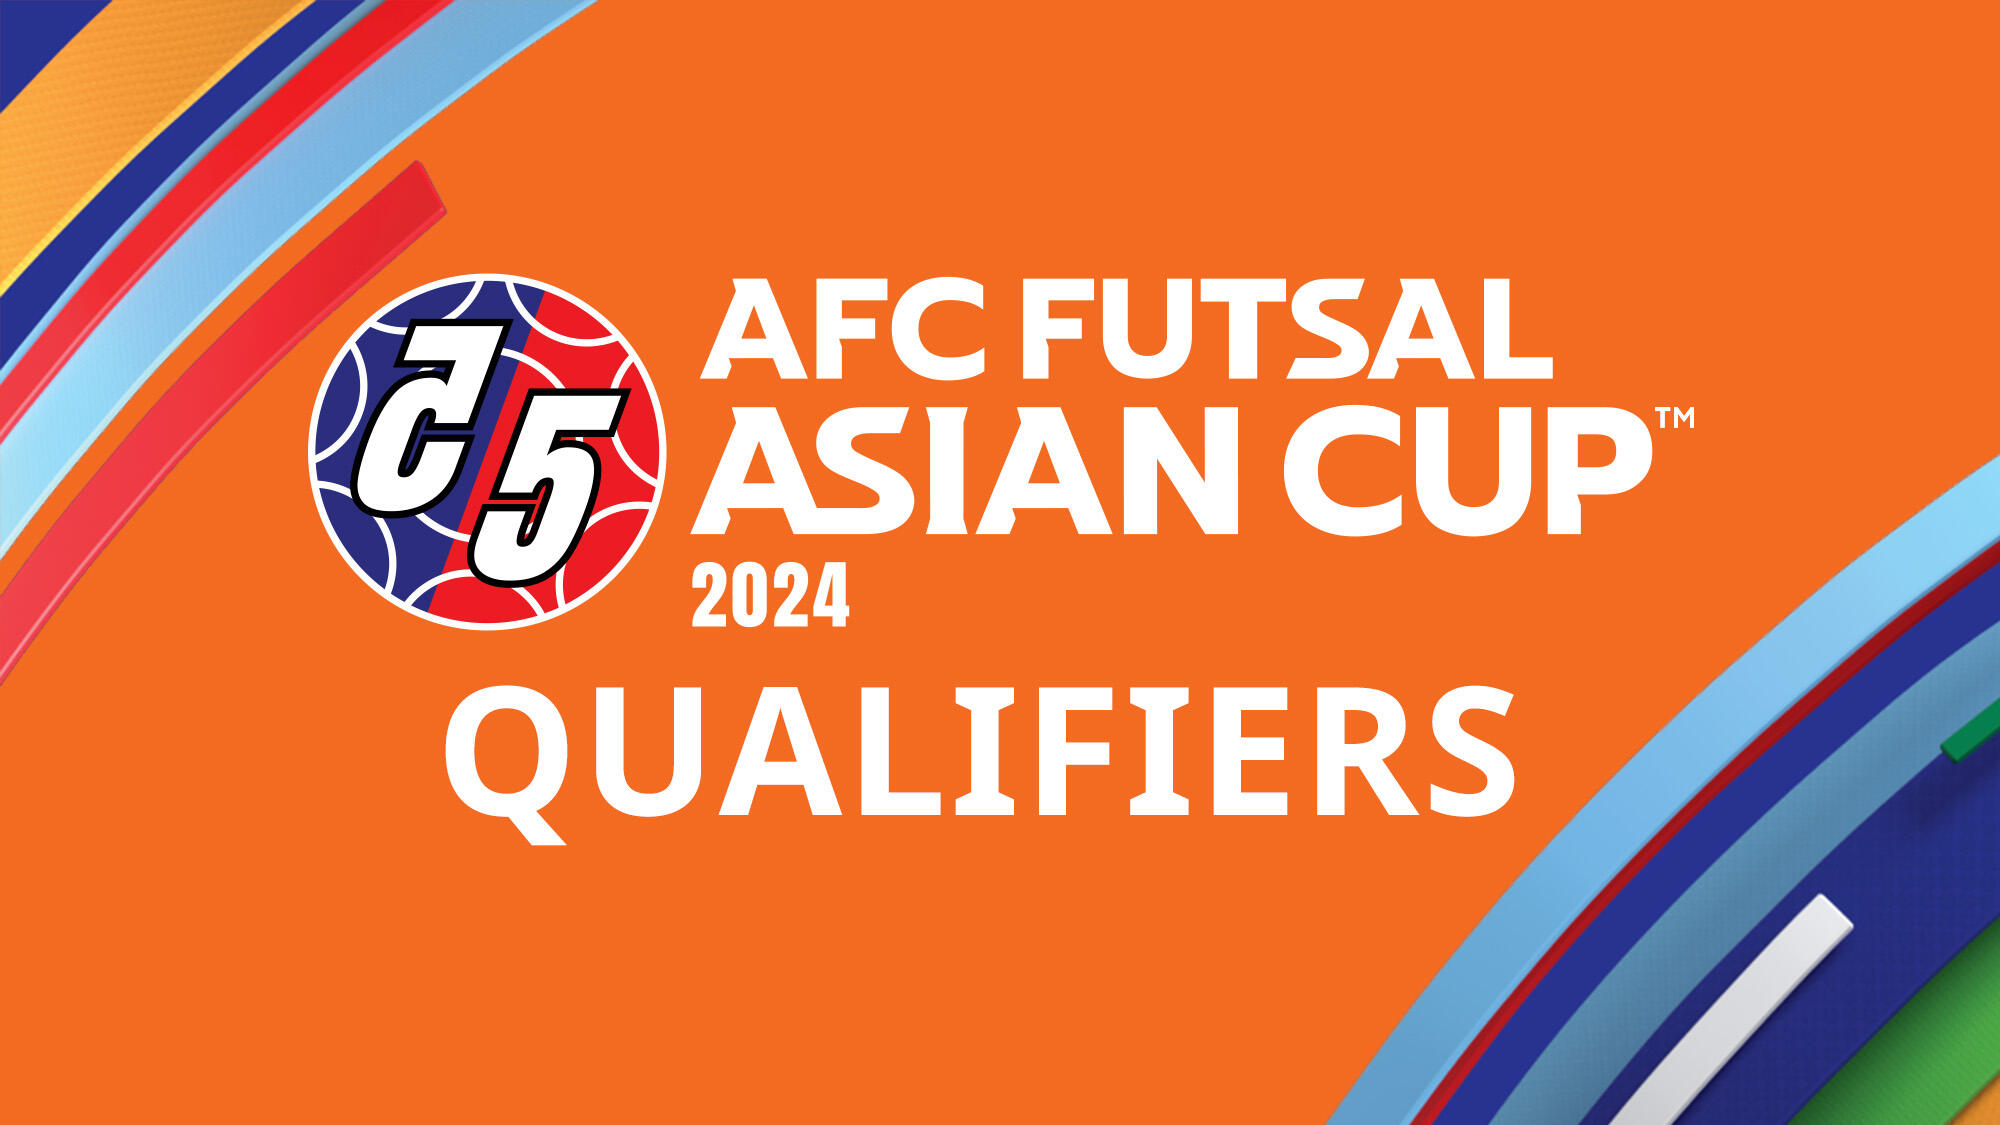 Video Extras AFC Futsal Asian Cup 2024 Qualifiers RCTI+